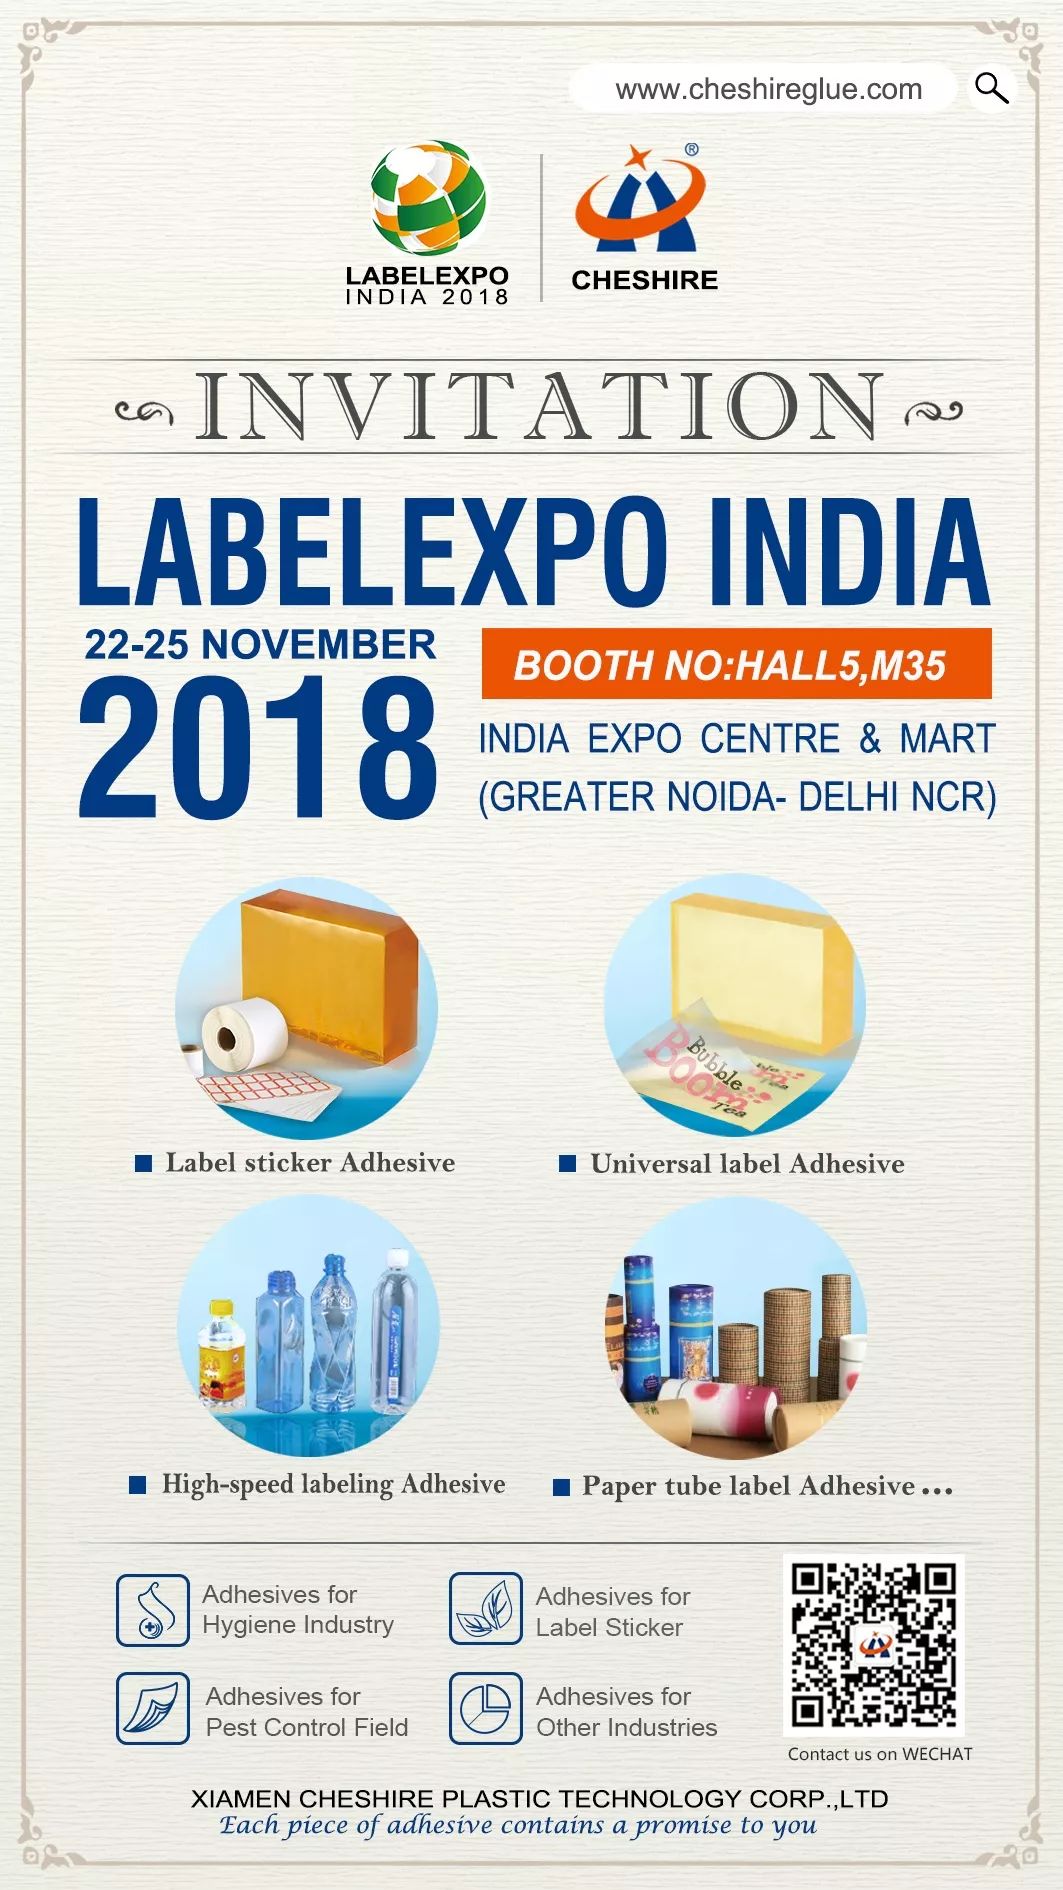 Cheshire adhesivo termofusible marcharán en Label Expo India